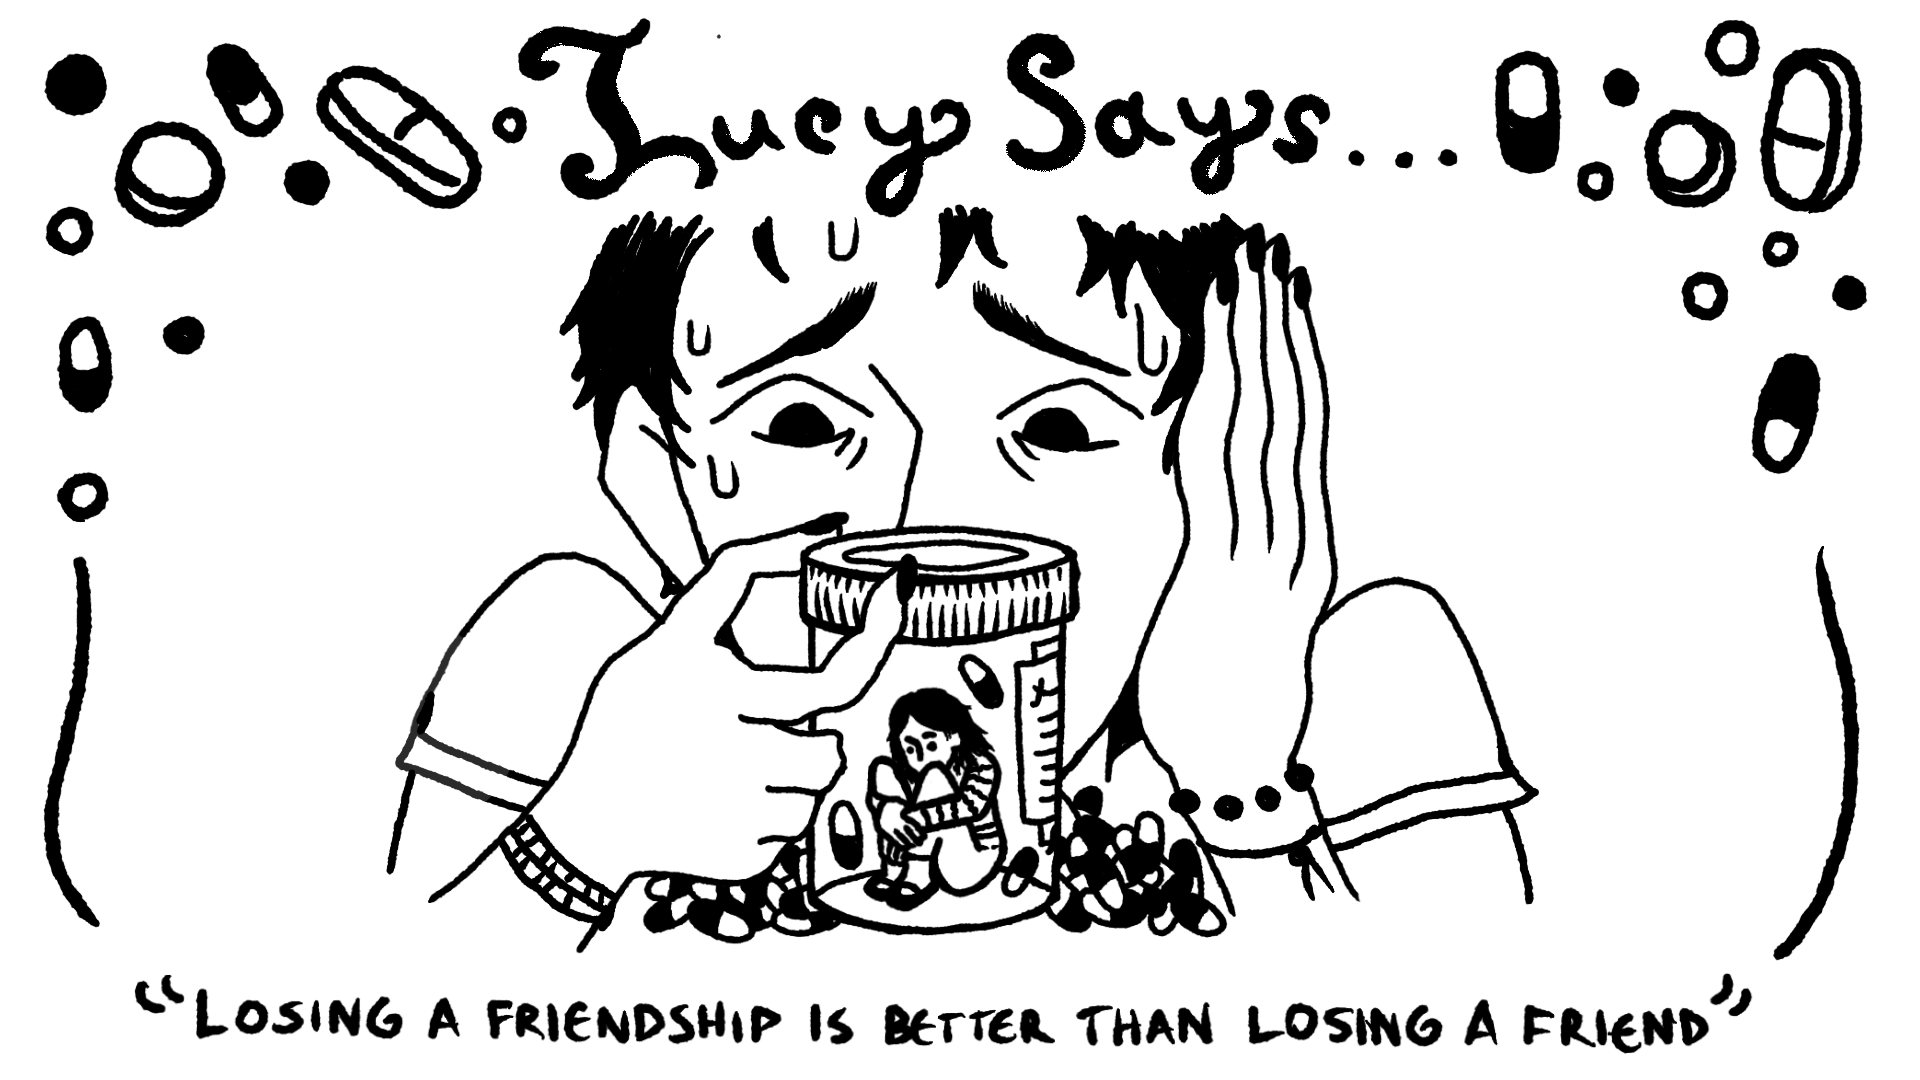 Black-and-white illustration of a person holding a pill bottle with a tiny person sitting inside it. The image is framed with illustrations of various pills, and has the words “Lucy Says” written across the top and “losing a friendship is better than losing a friend” across the bottom.